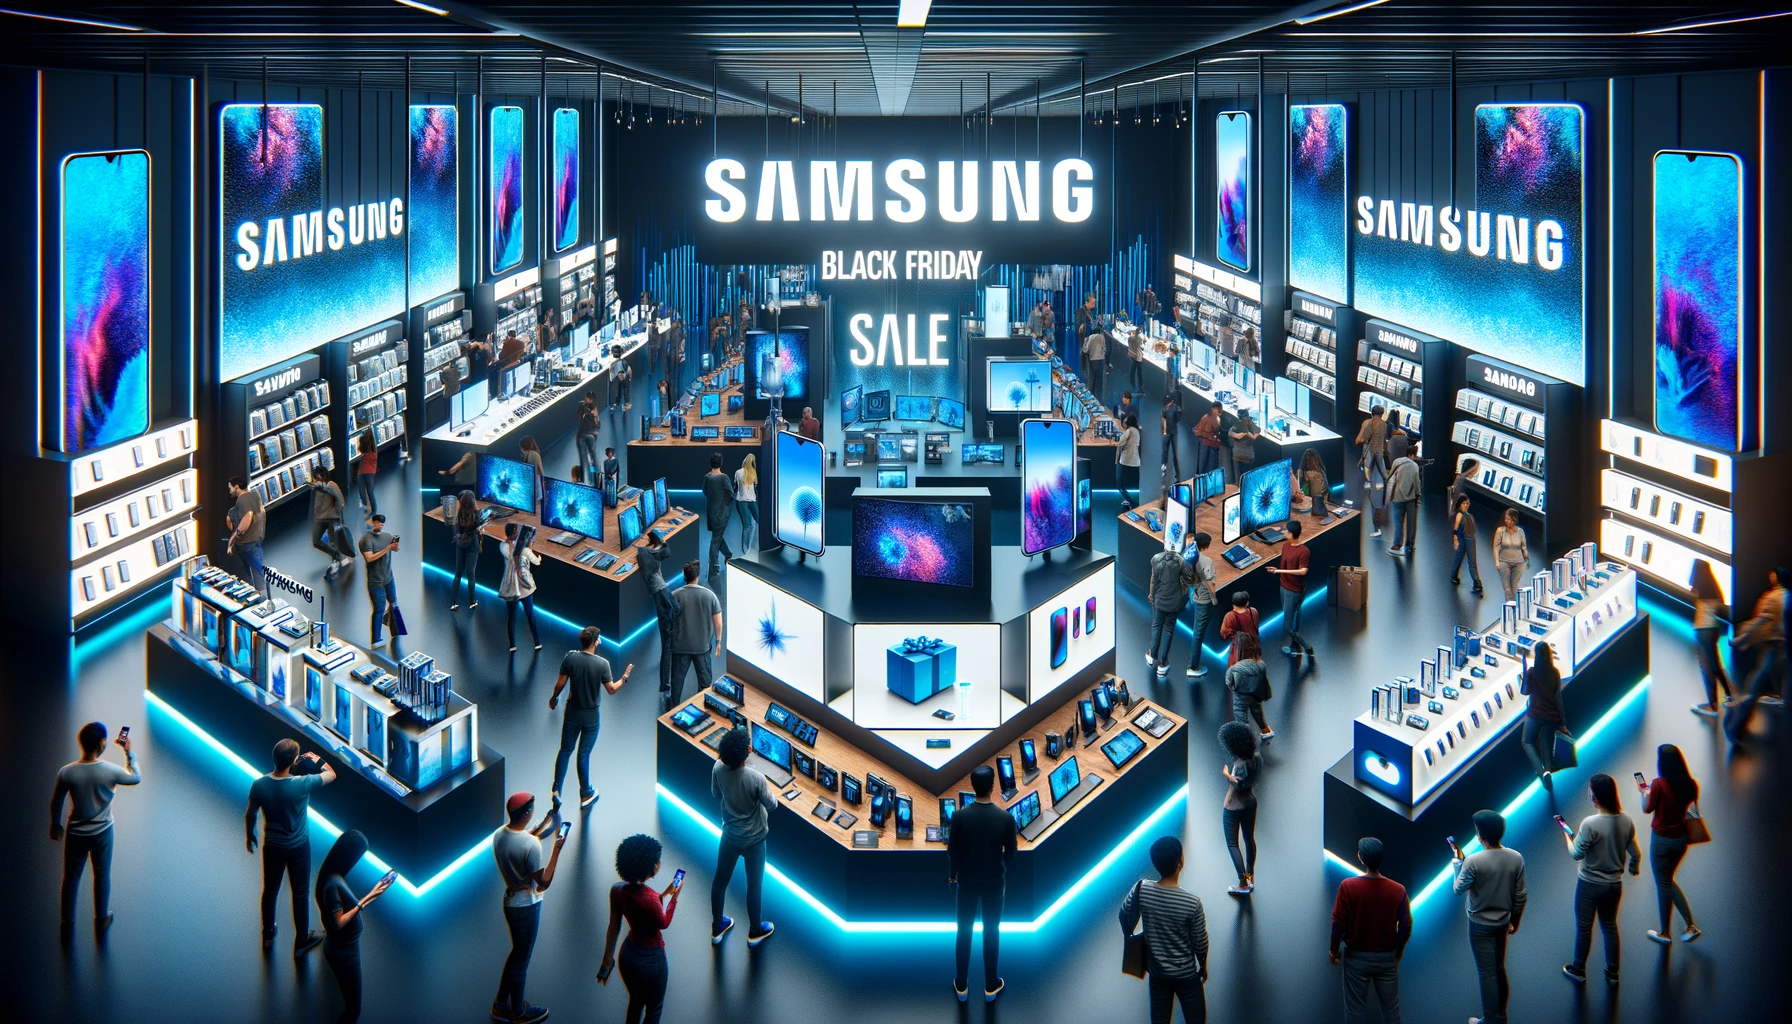  A high quality 3D generation of a Samsung store filled with Monitors, TVs, phones and various tech with the words Samsung Black Friday Sale in the middle 